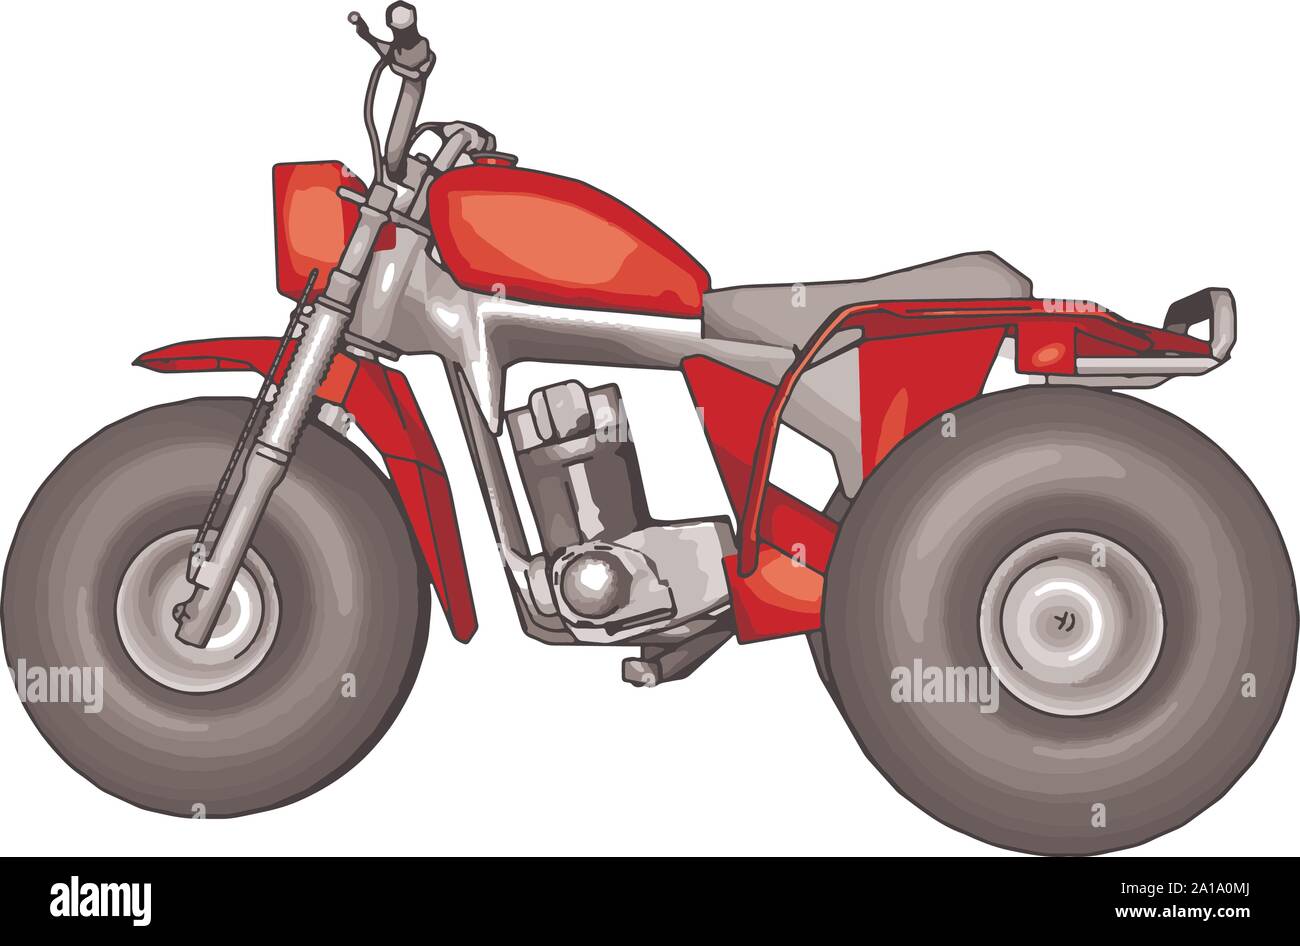 Red motorcycle, illustration, vector on white background. Stock Vector